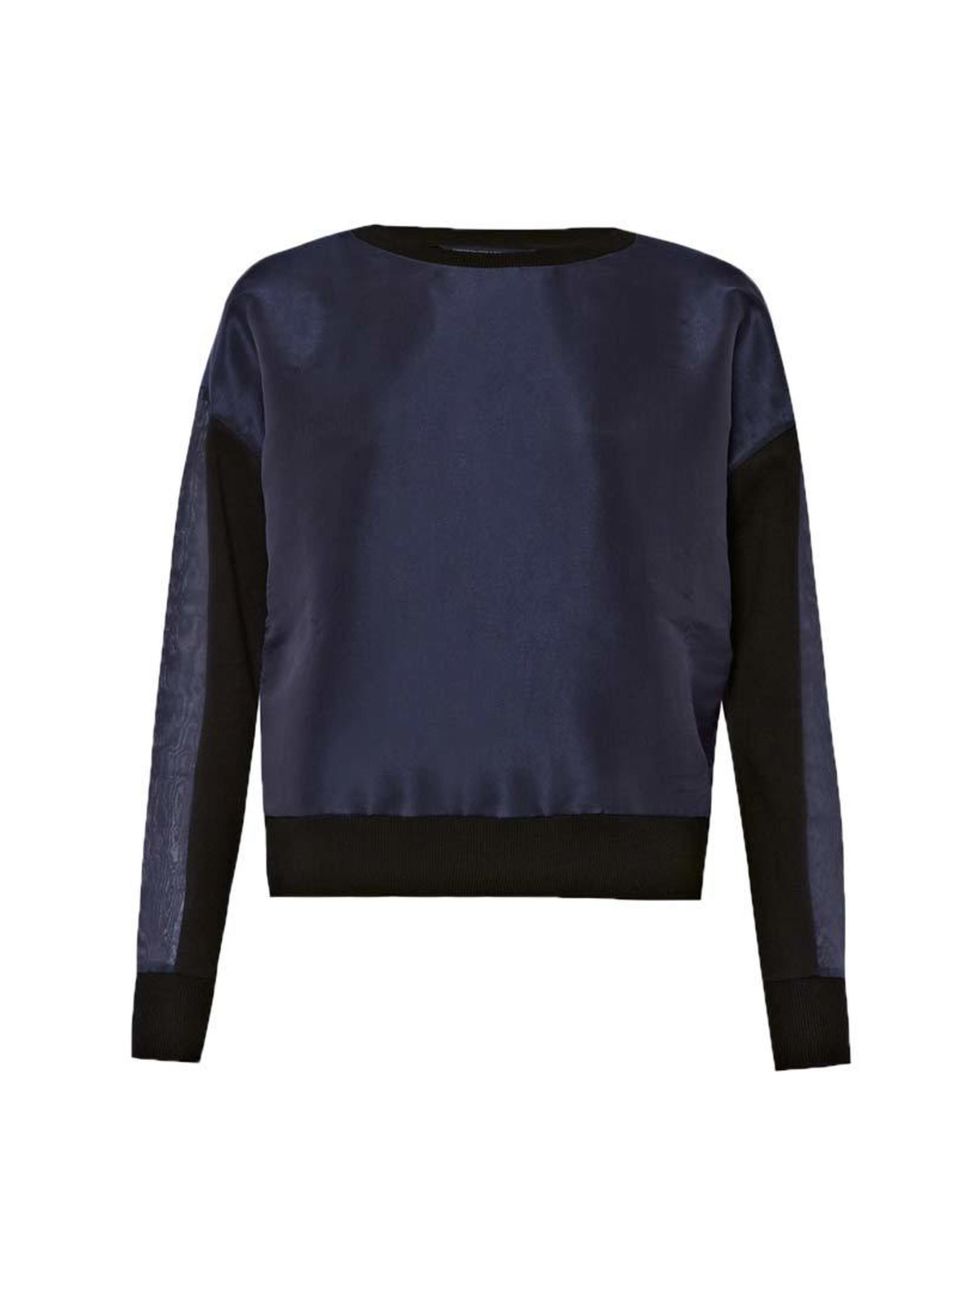 <p>A great way to dress up jeans for office-to-bar days, this sweatshirt is on Head of Editorial Business Management Debbie Morgan's shopping list.</p>

<p> </p>

<p><a href="http://www.frenchconnection.com/product/Woman+New+In/77CXG/Organza+Textured+Swea